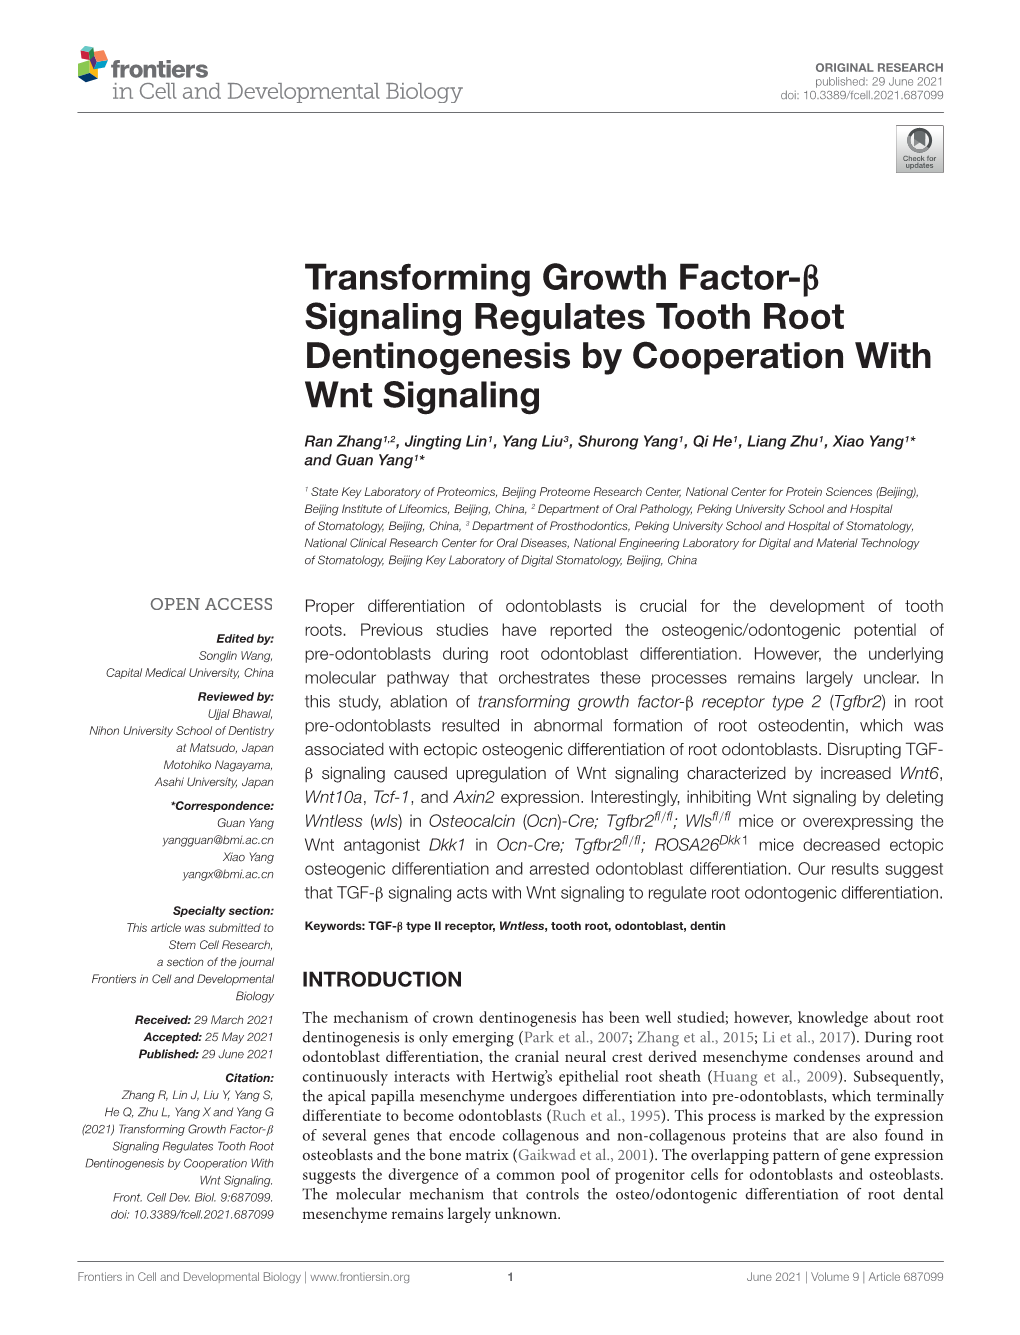 Transforming Growth Factor-Β Signaling Regulates Tooth Root Dentinogenesis by Cooperation with Wnt Signaling